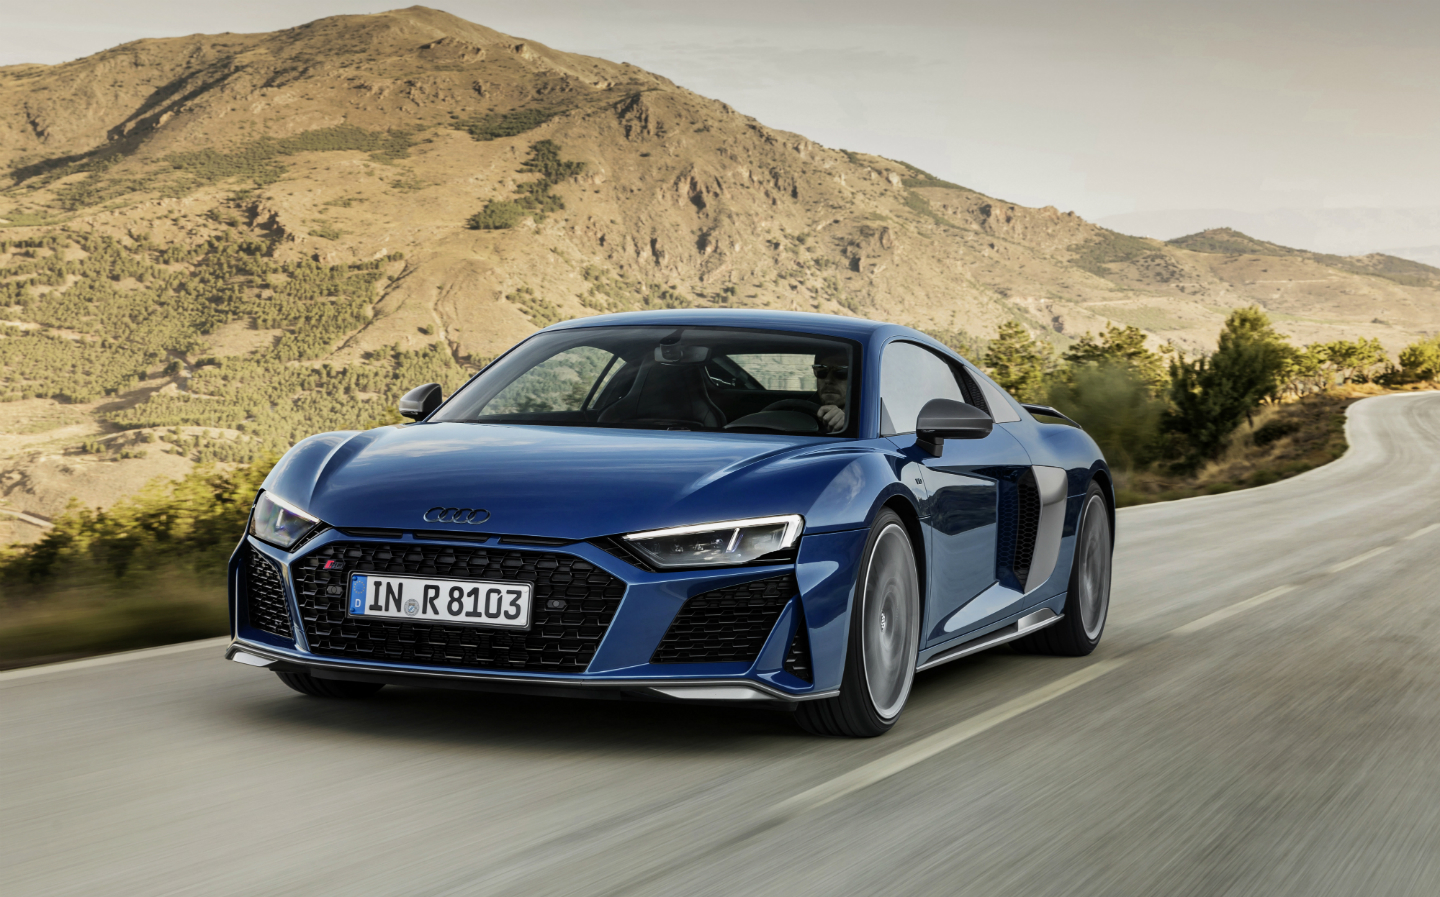 Clarkson: The Audi R8 is exactly what a supercar should be... and I still wouldn't have one